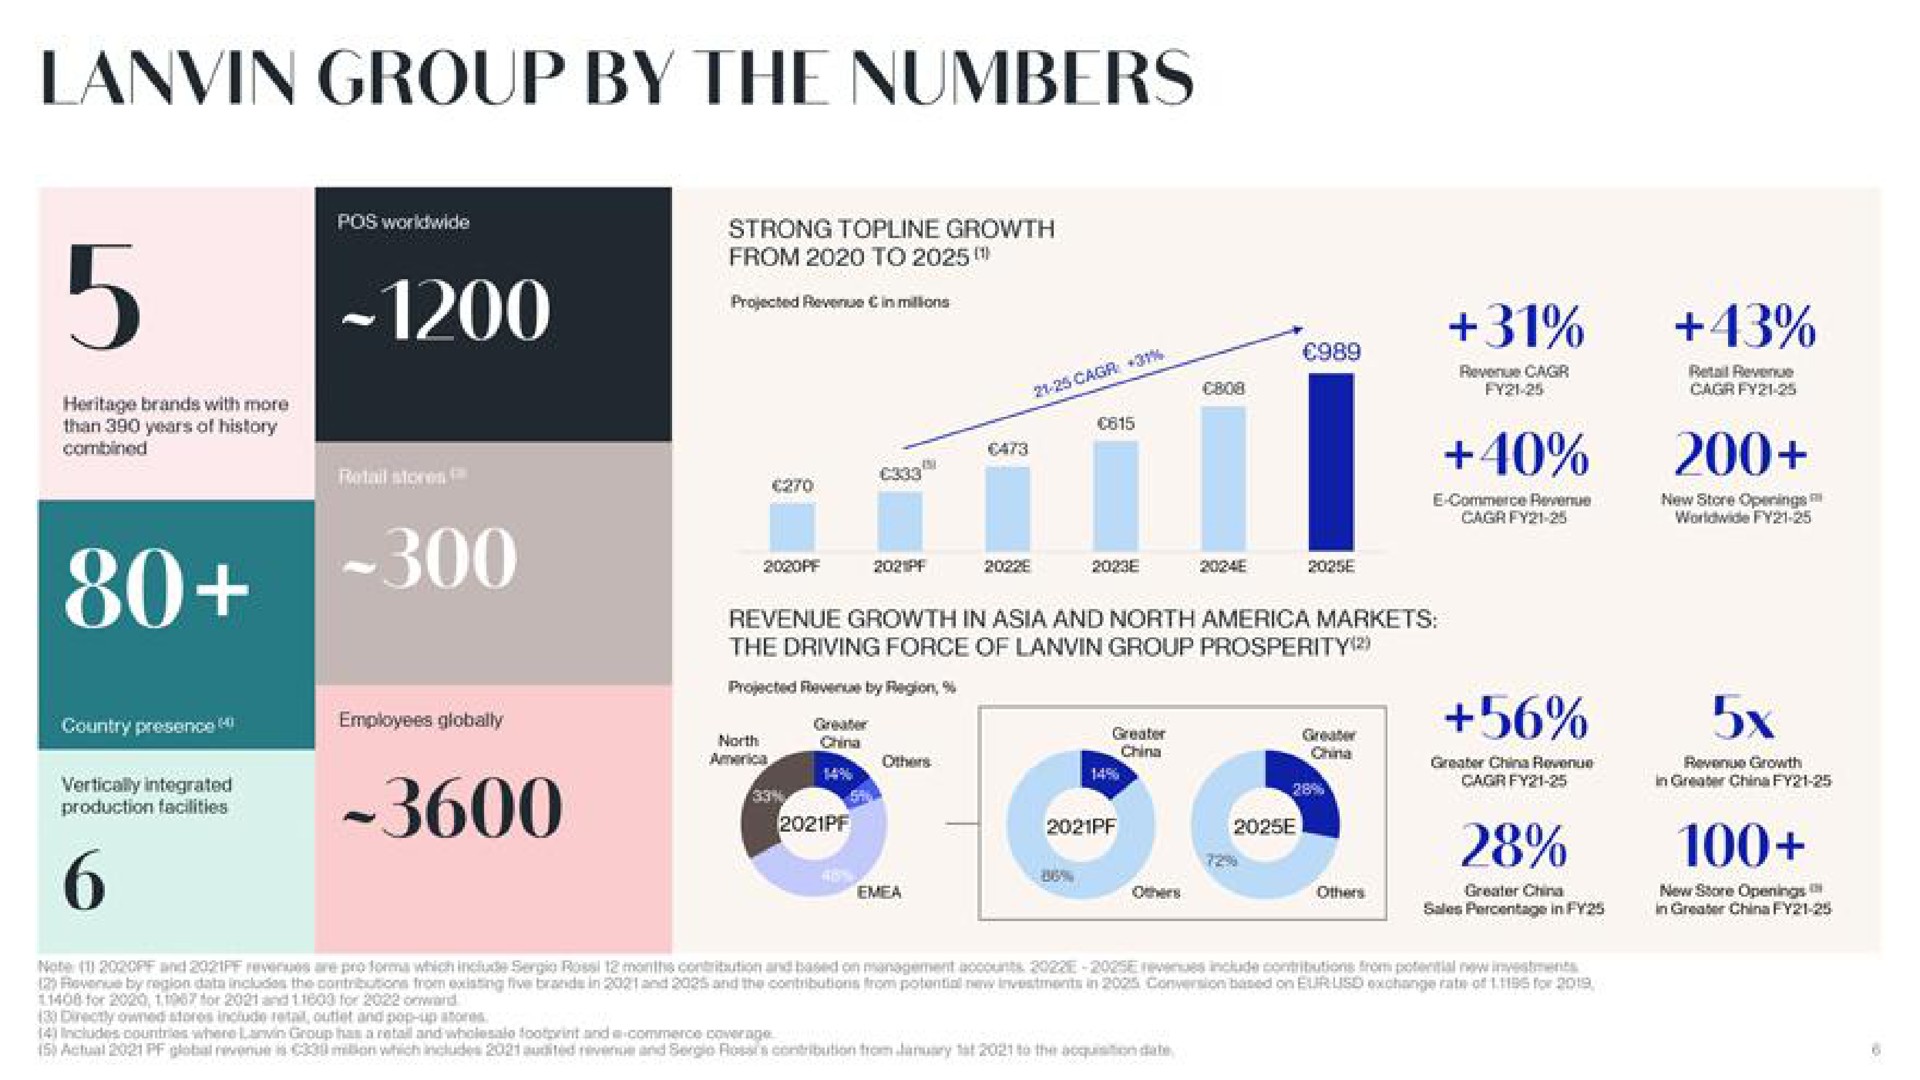 group by the numbers | Lanvin